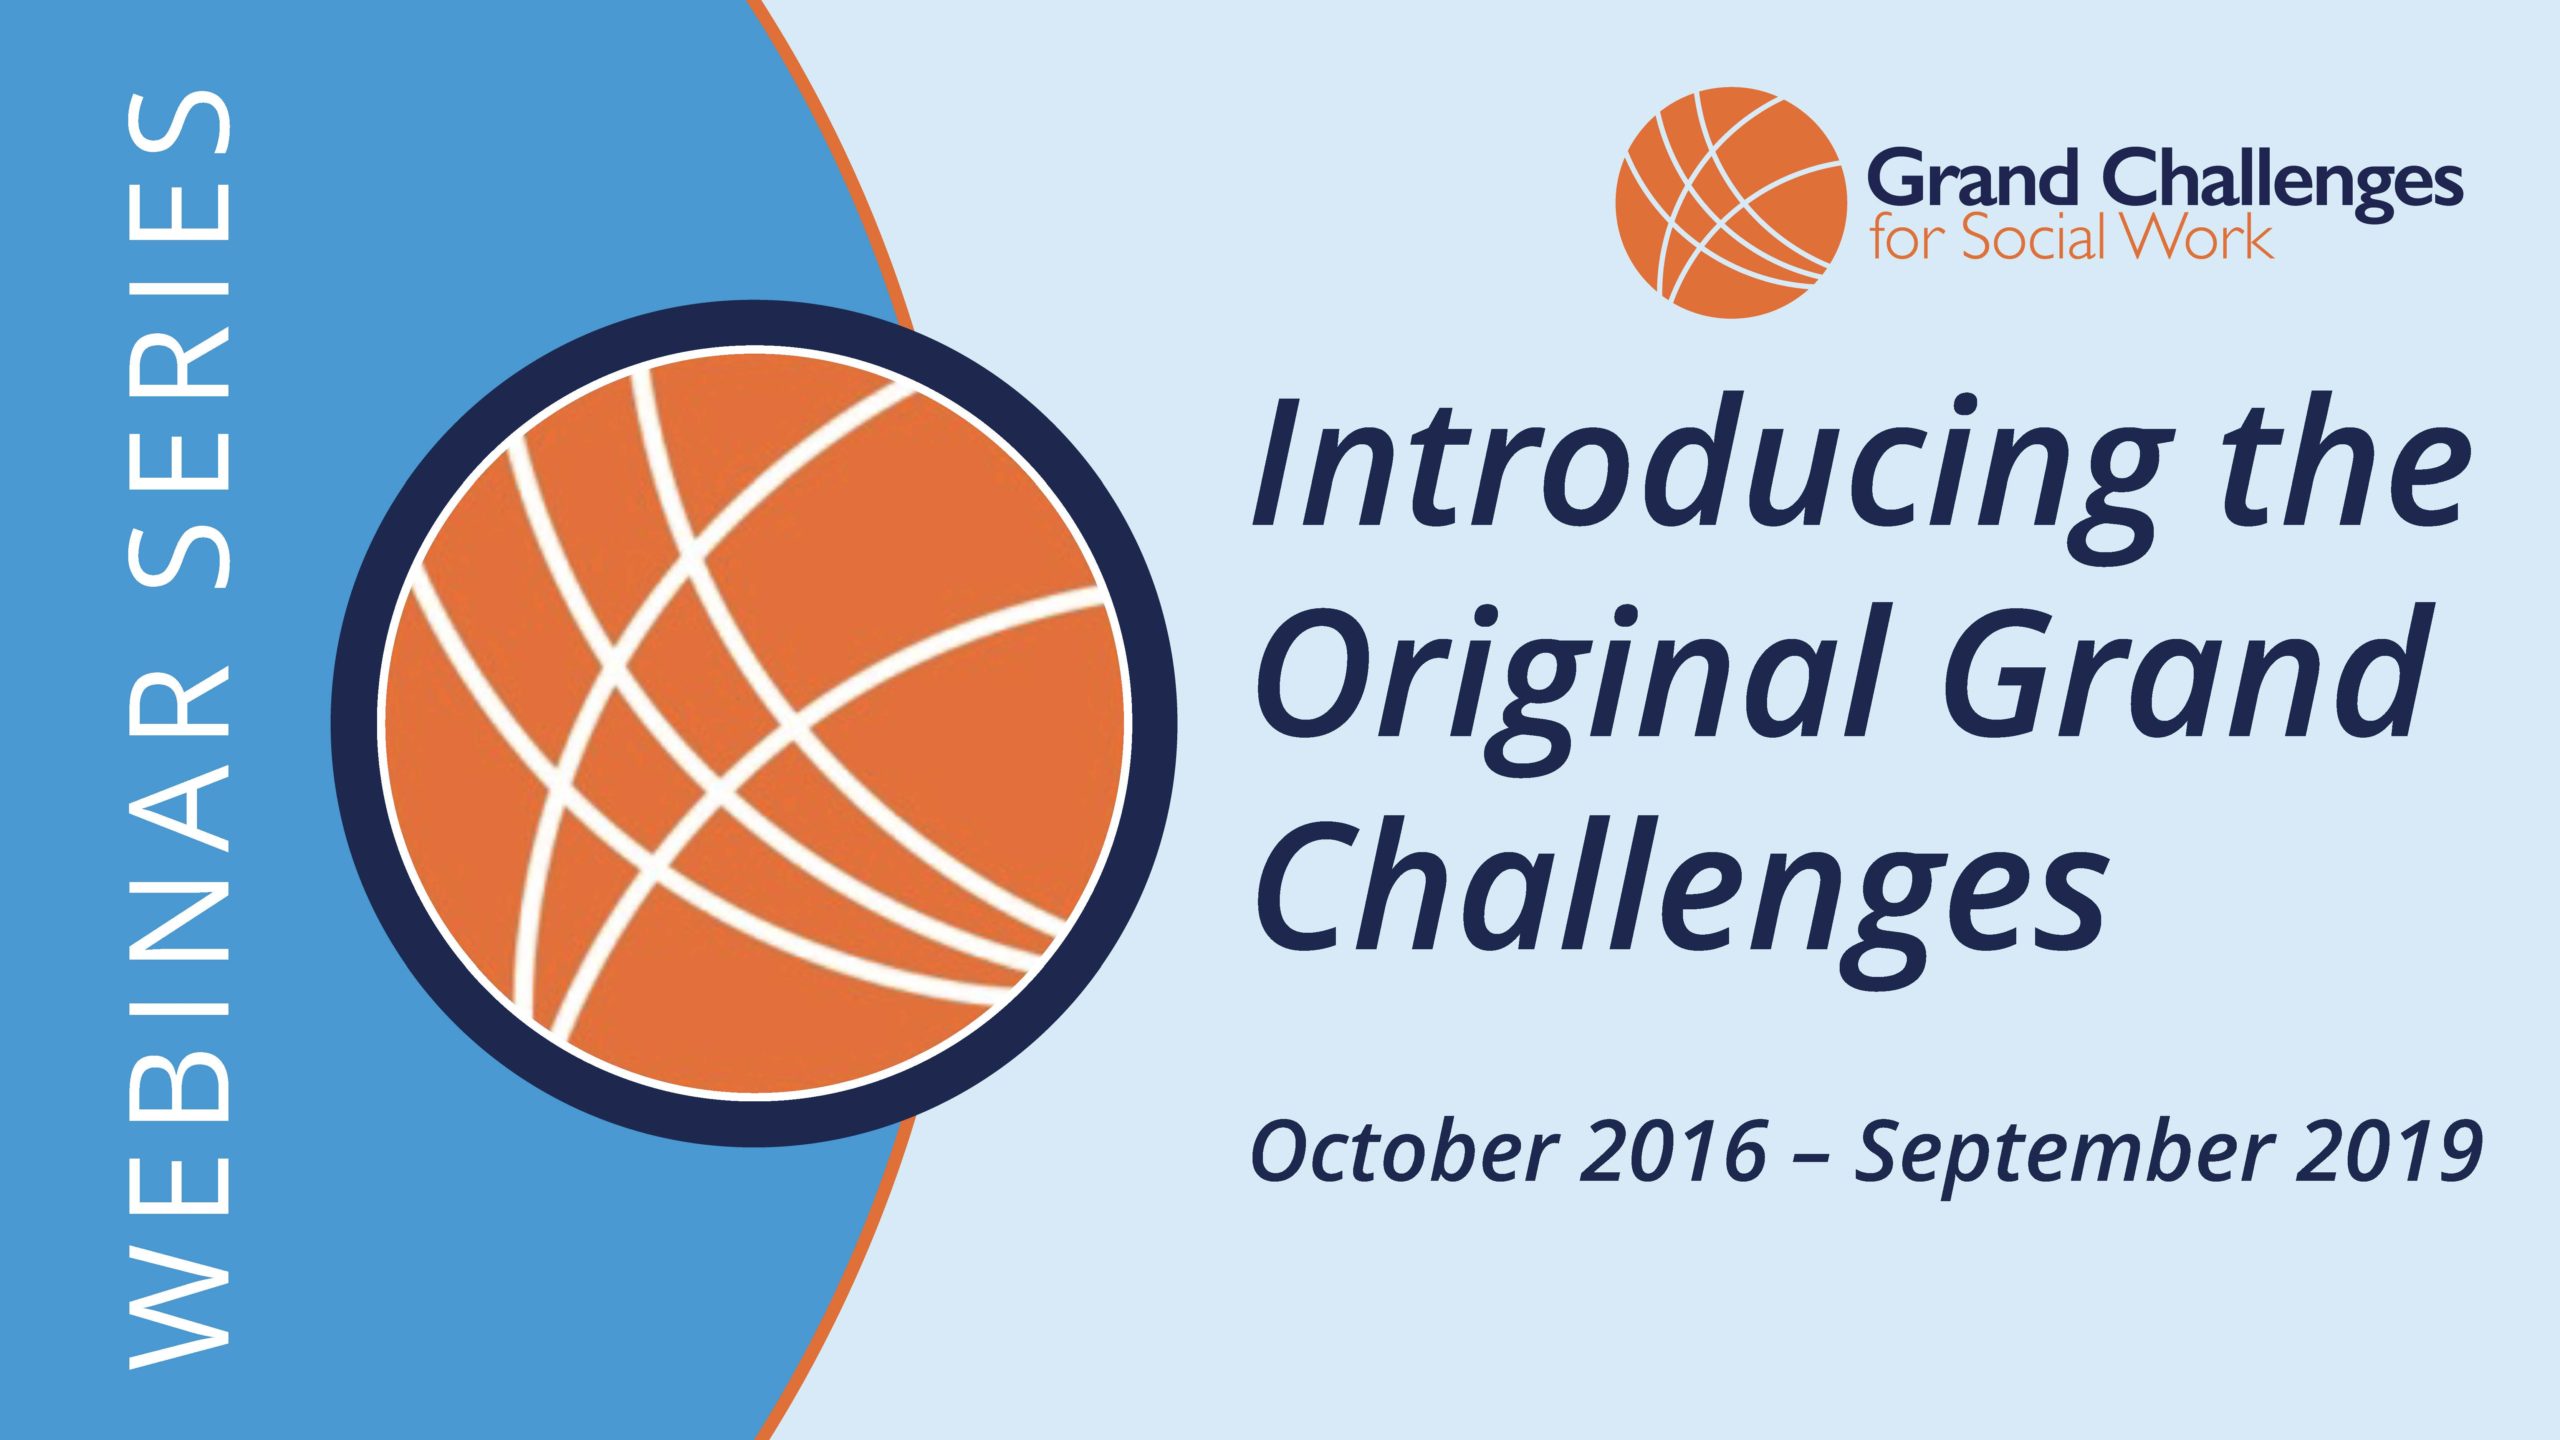 Introducing the Original Grand Challenges